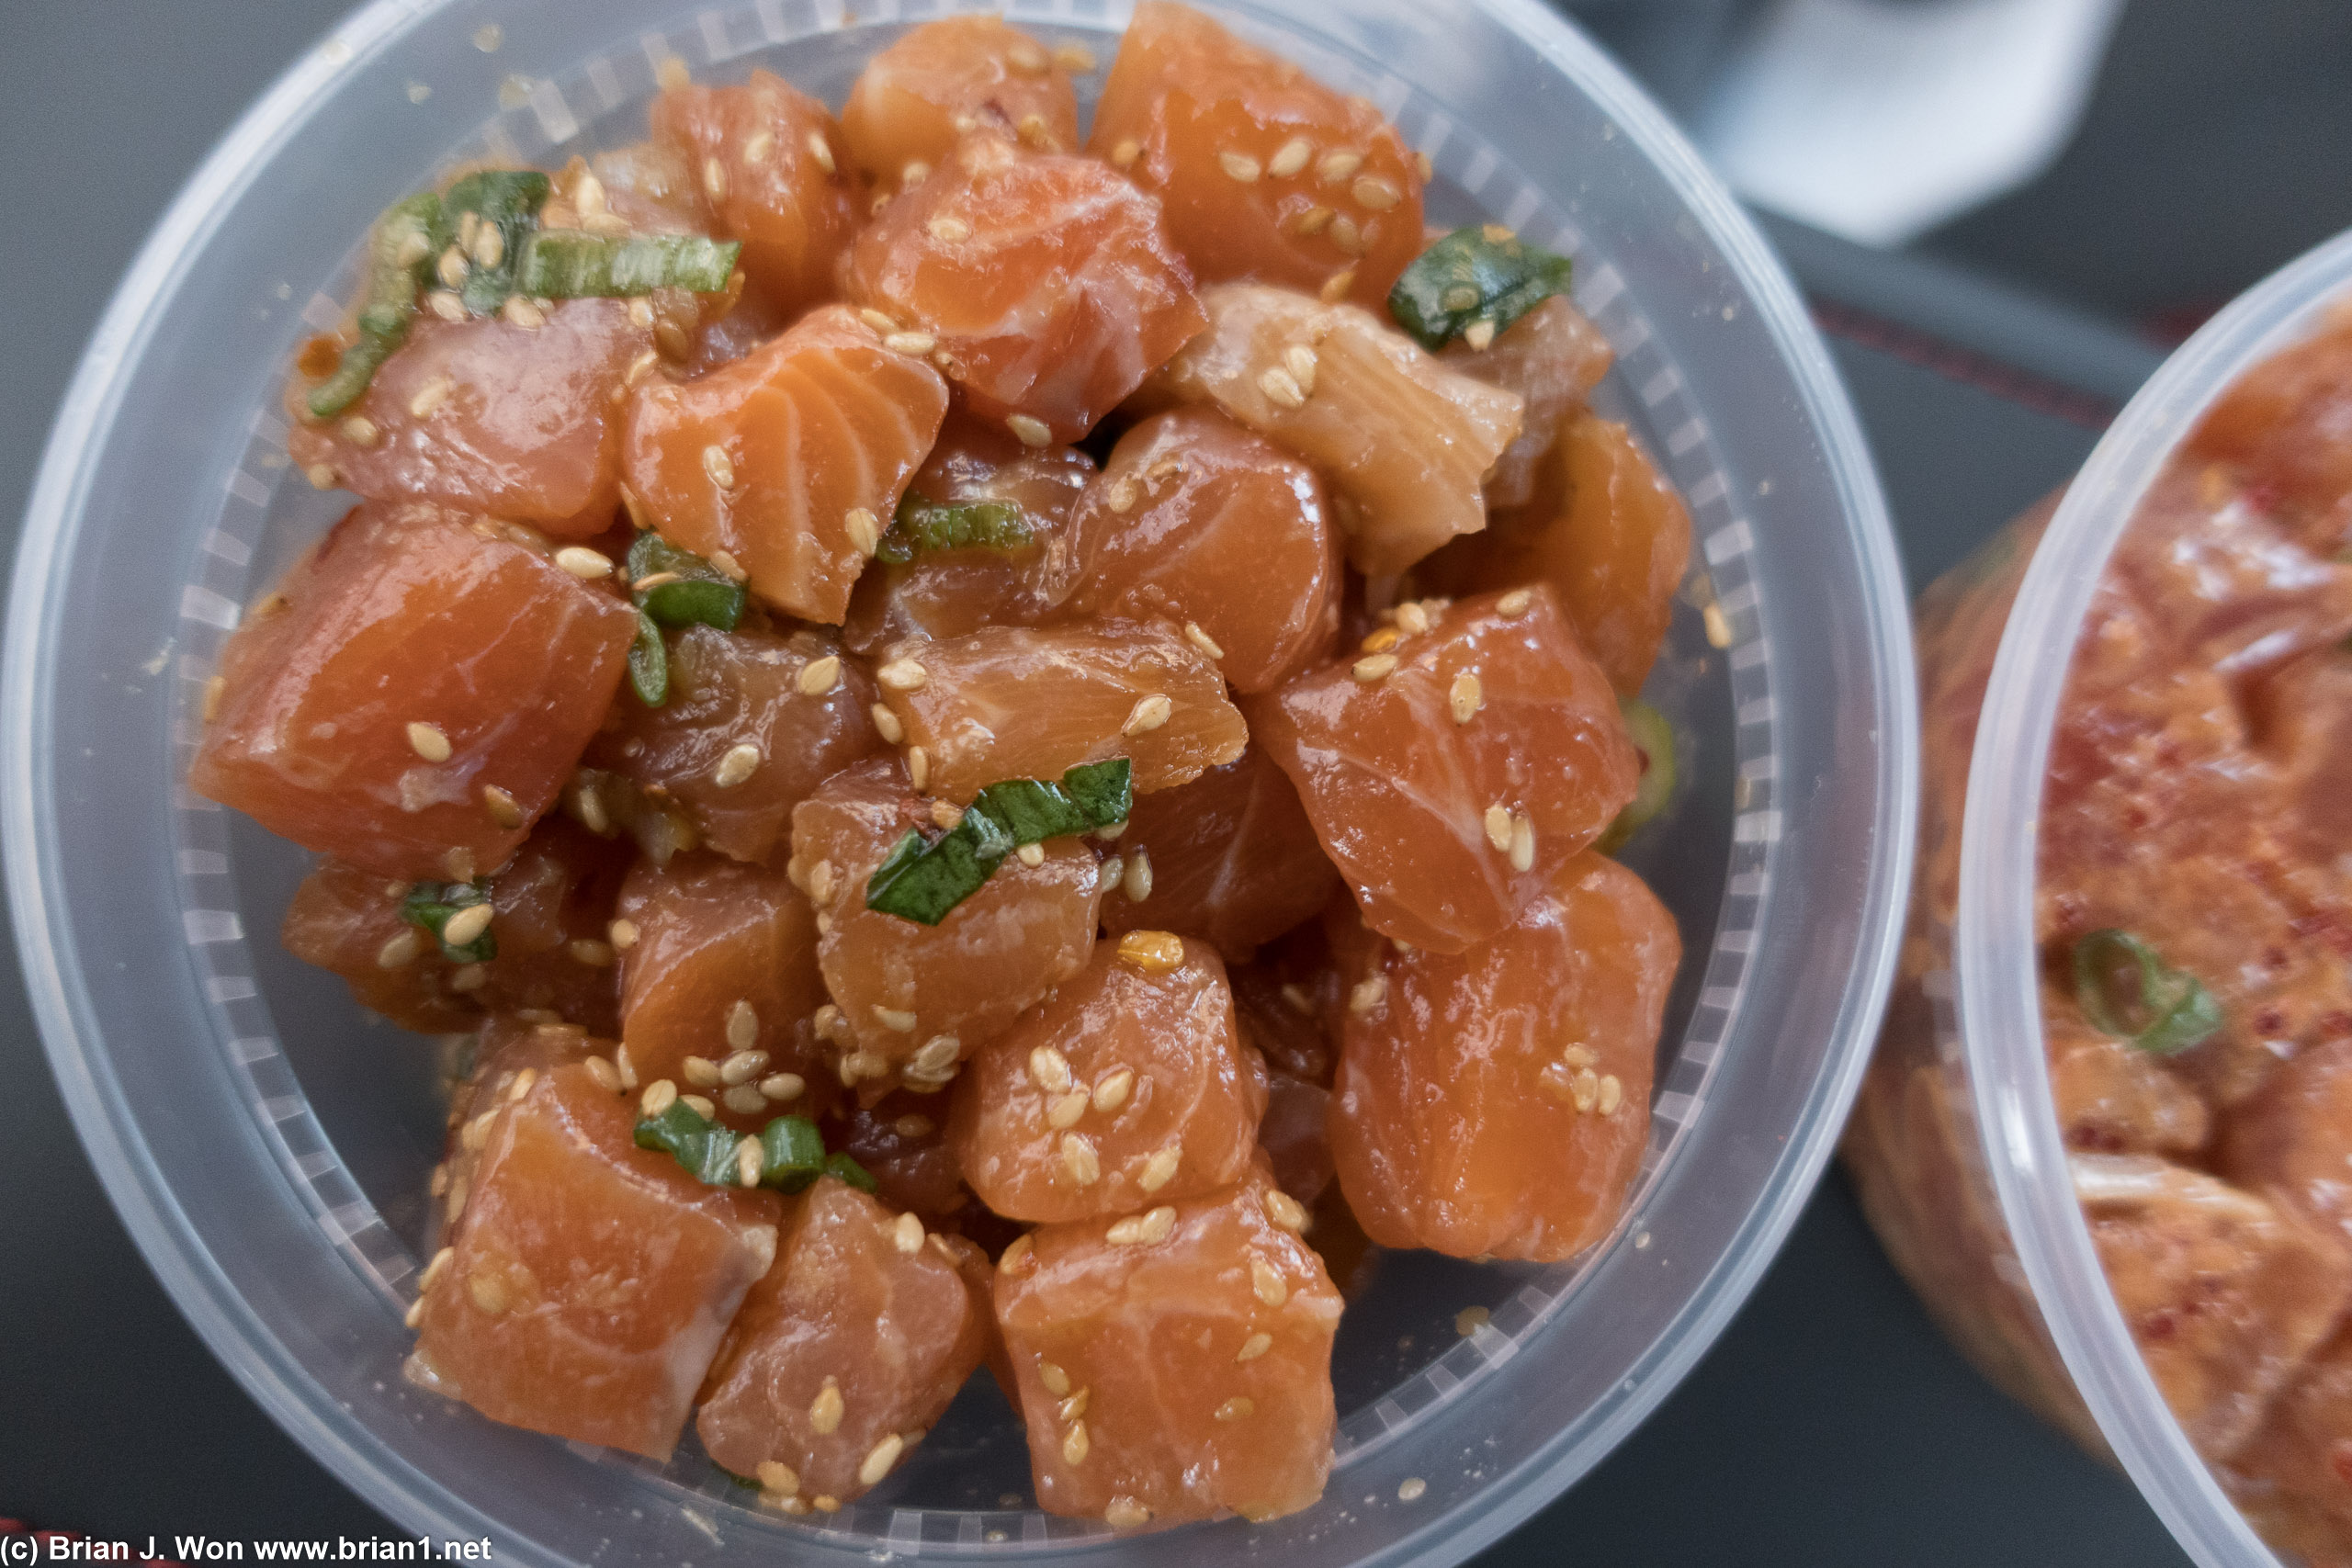 Salmon was not great--mostly just shoyu, not much else for flavor.